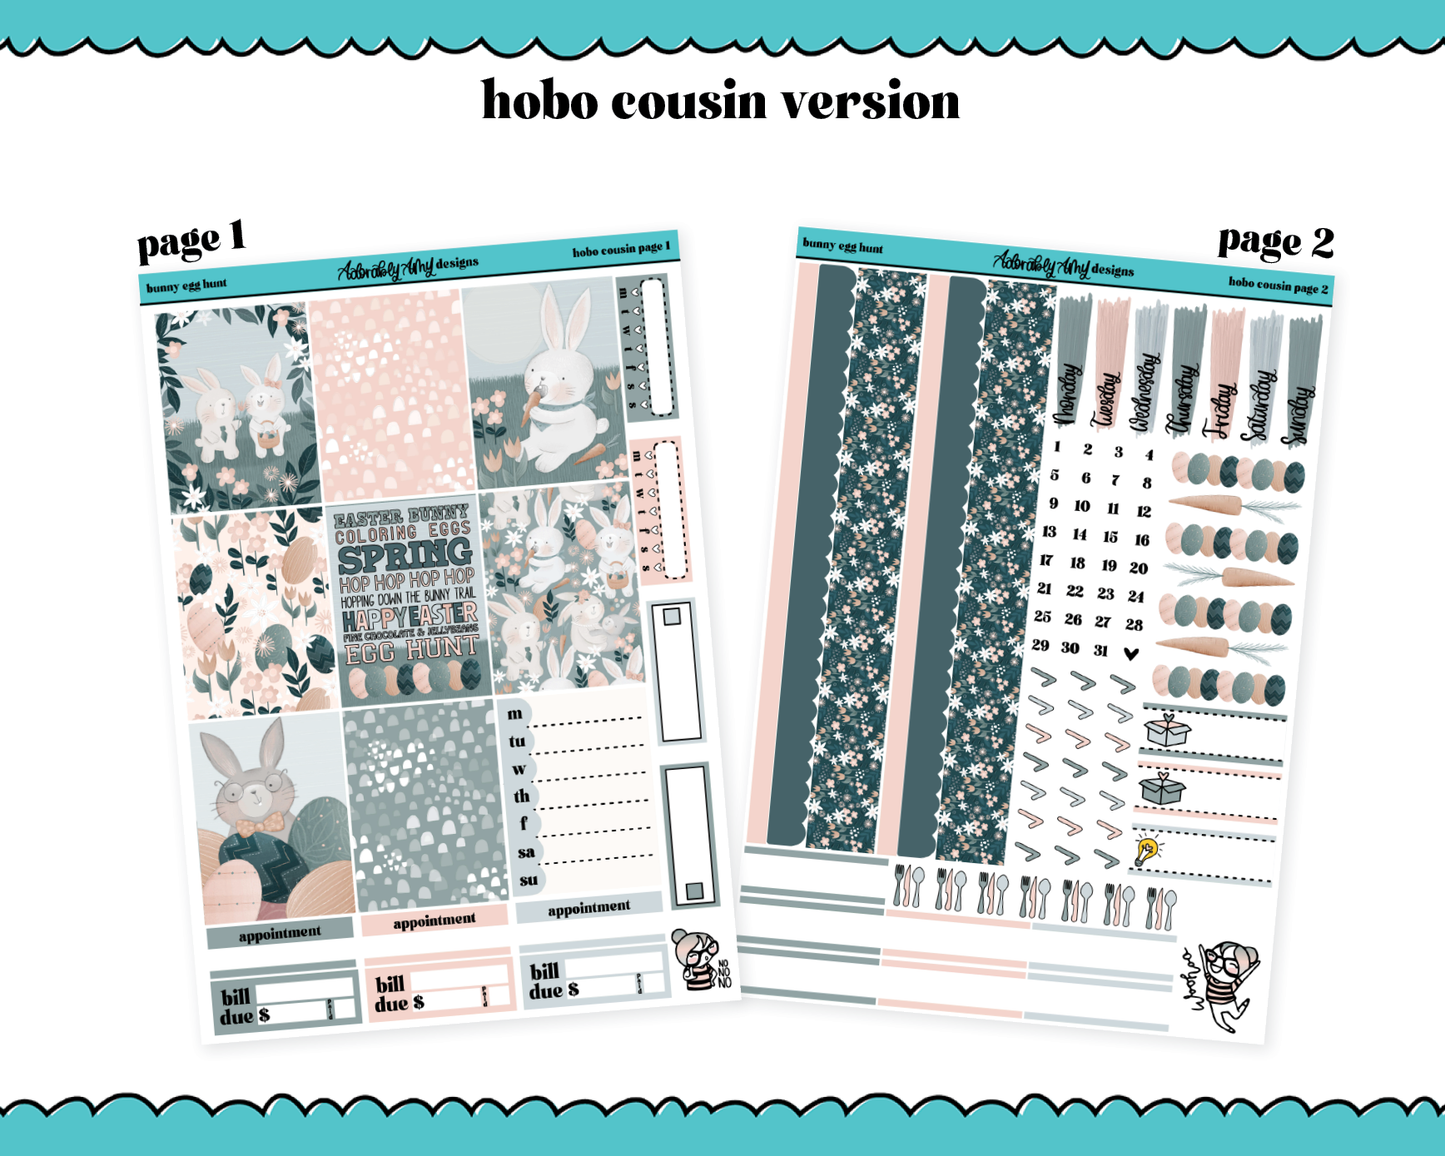 Hobonichi Cousin Weekly Bunny Egg Hunt Watercolor Planner Sticker Kit for Hobo Cousin or Similar Planners